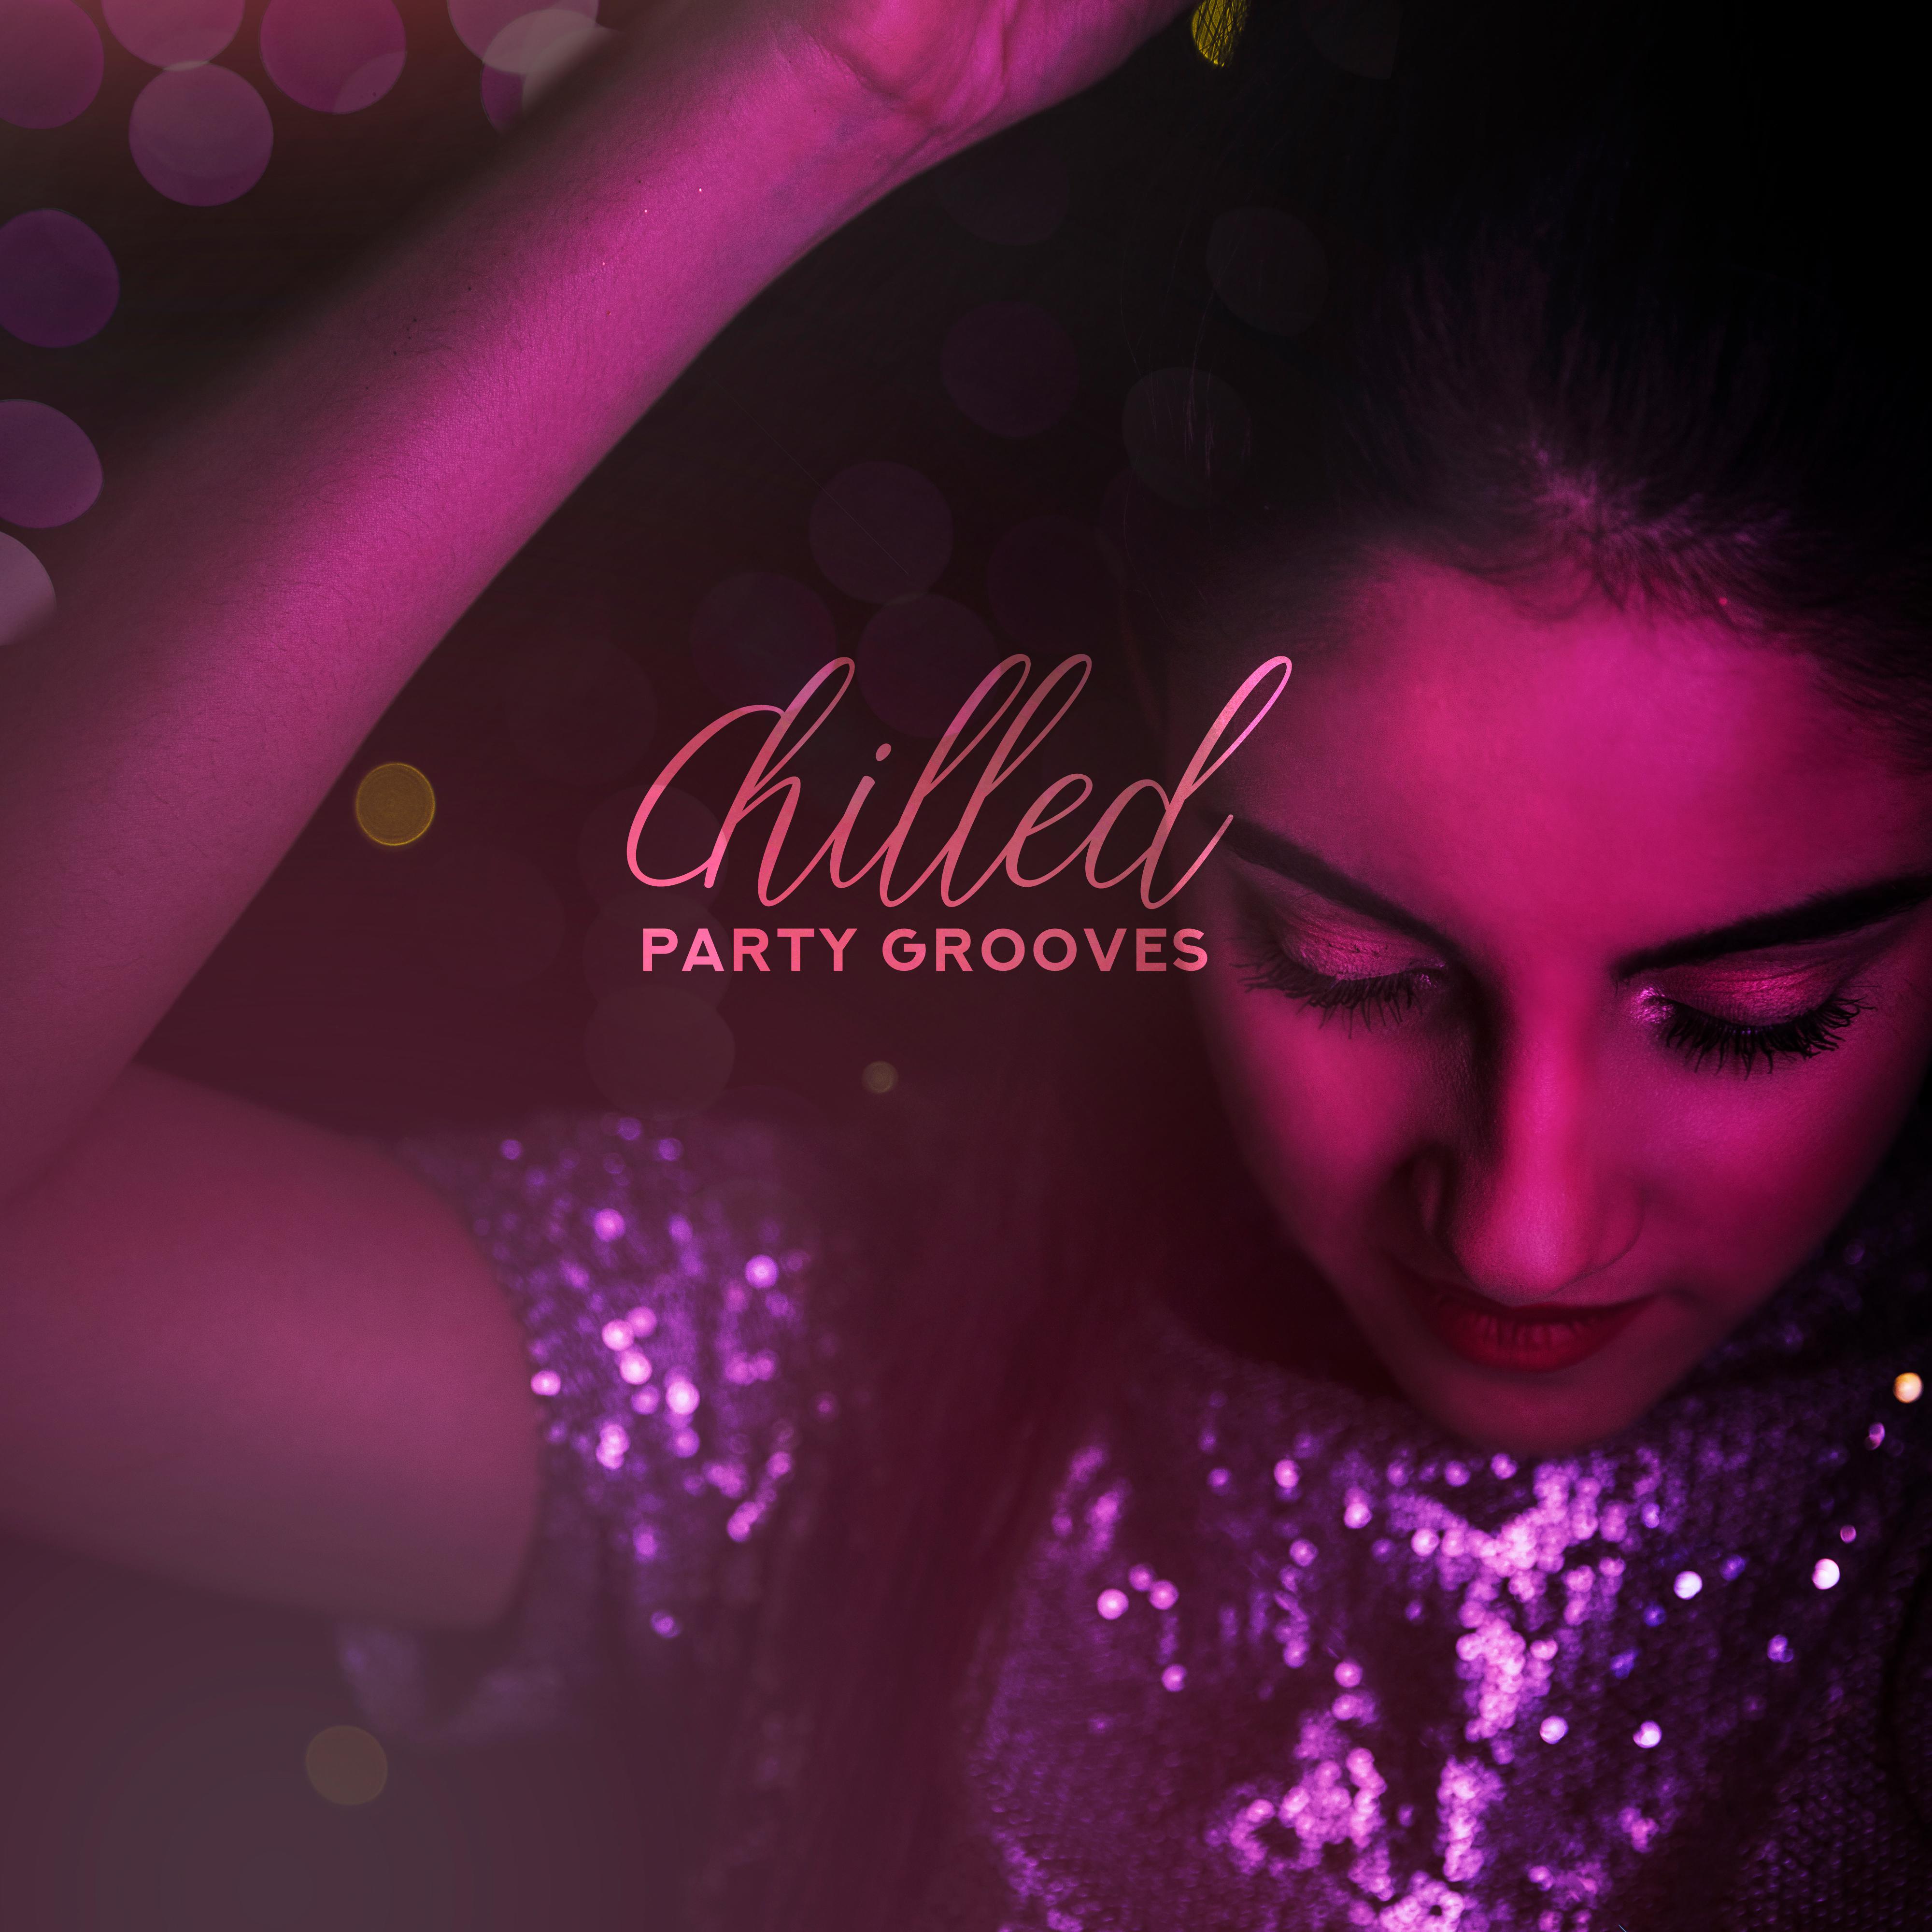 Chilled Party Grooves: 2019 Chillout Dancing Music Deep Beats, Electronic Vibes for Party, EDM Sounds, Low BPM Melodies